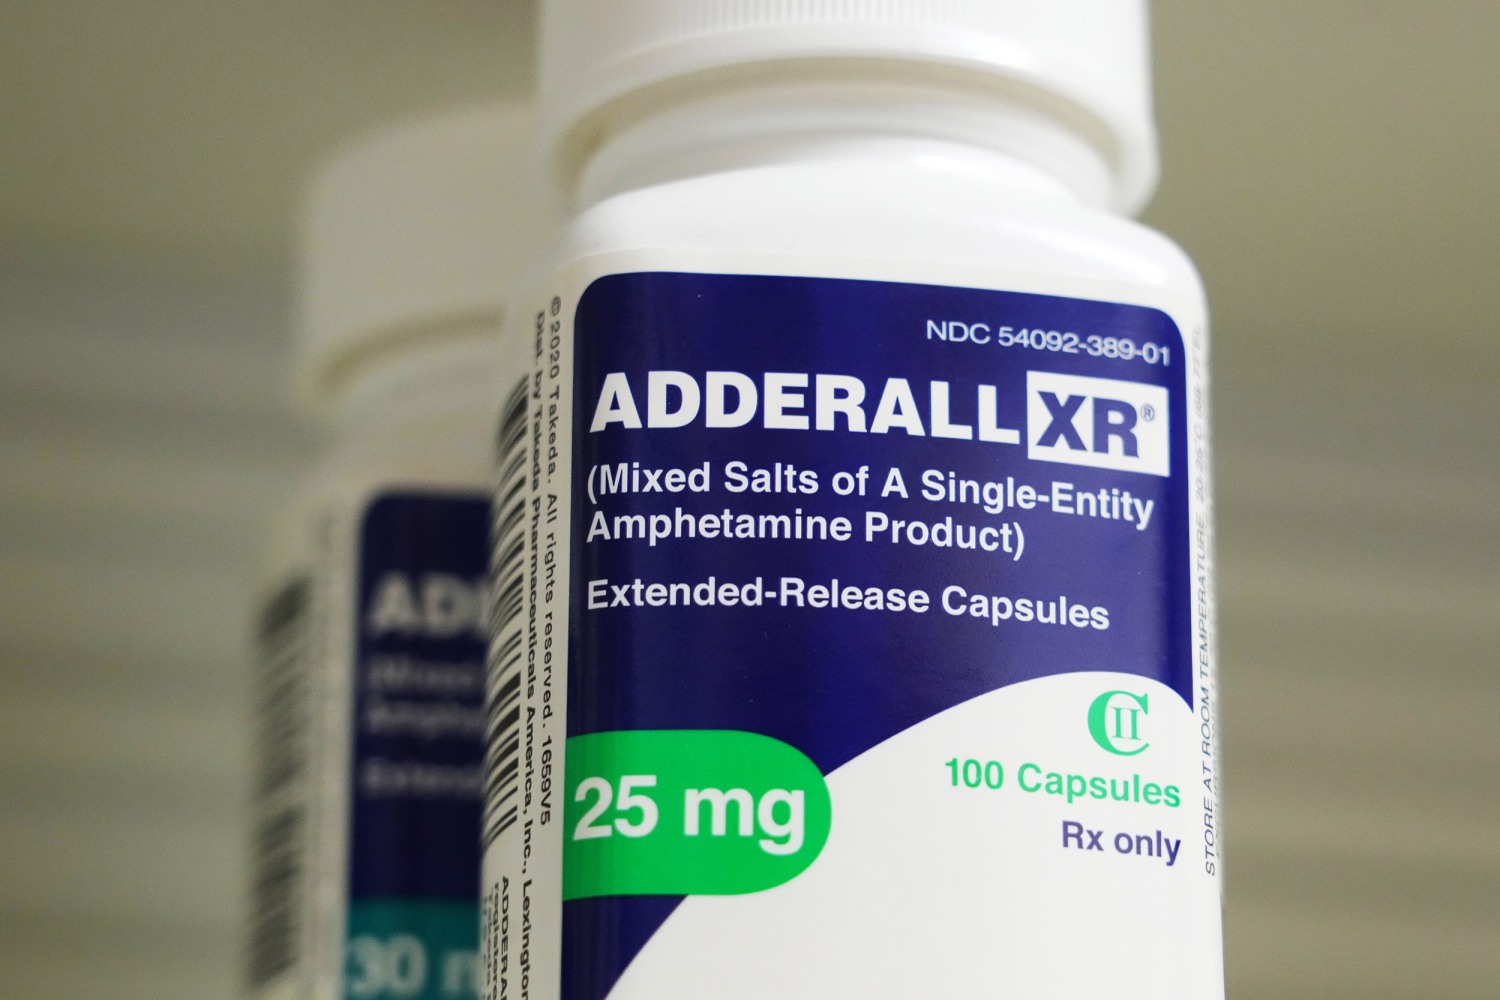 Modafinil Vs Adderall: Which Is More Effective For Focus And Energy?